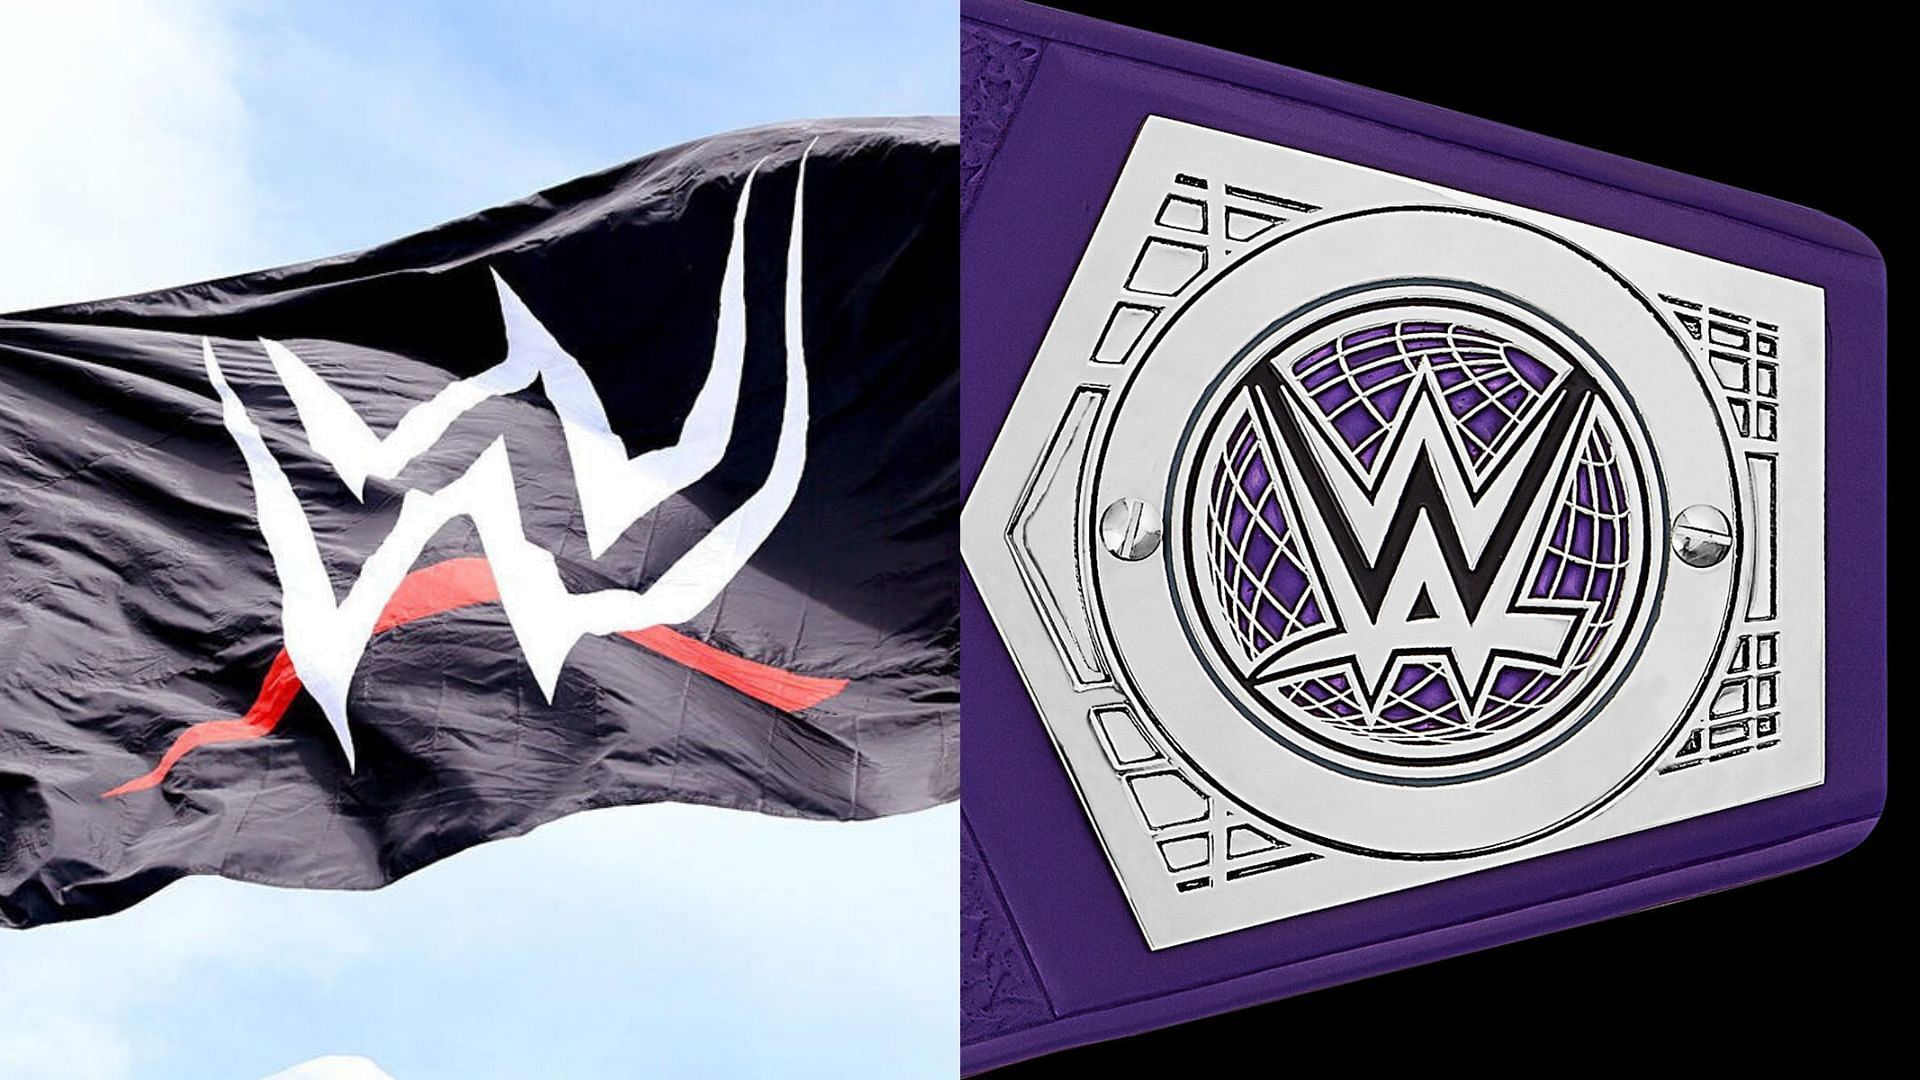 This WWE Superstar is a former NXT Cruiserweight Champion (title design on the right)